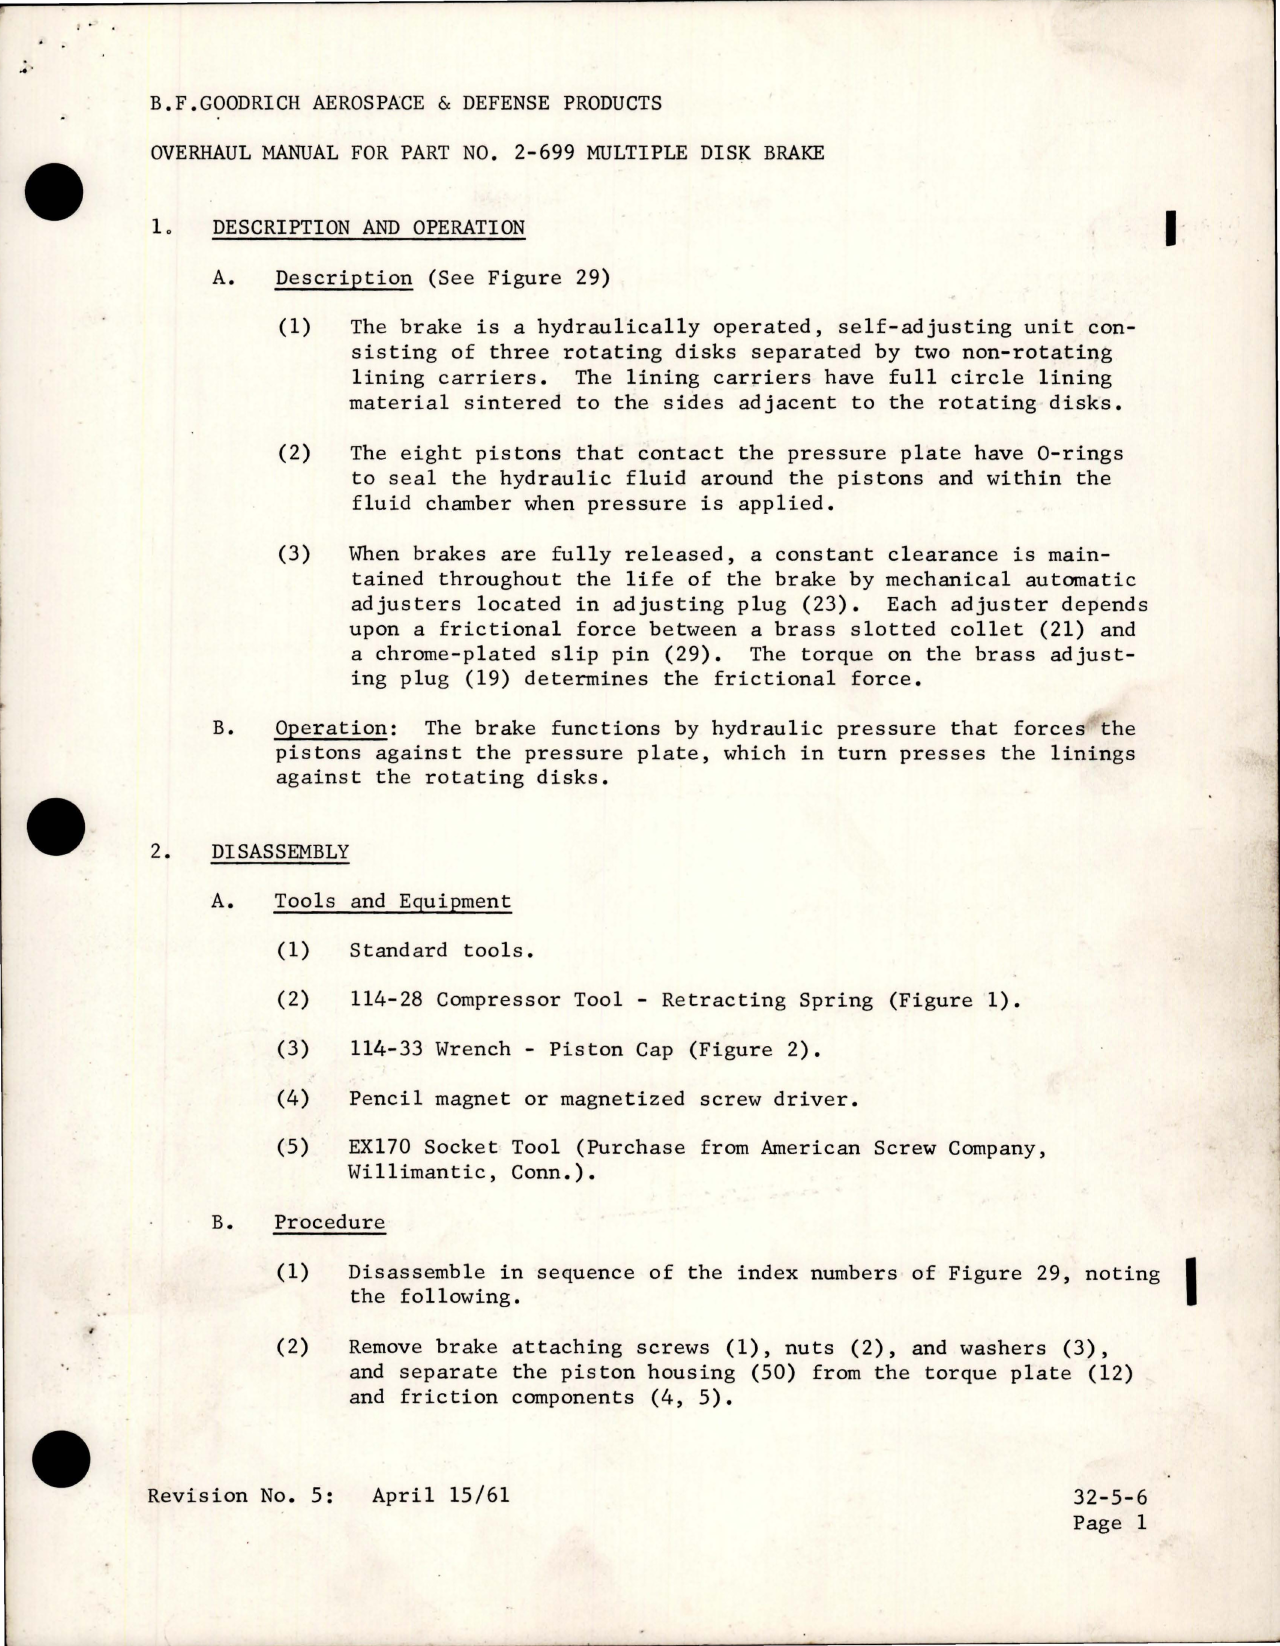 Sample page 5 from AirCorps Library document: Overhaul Manual for Multiple Disk Brake - Part 2-699 